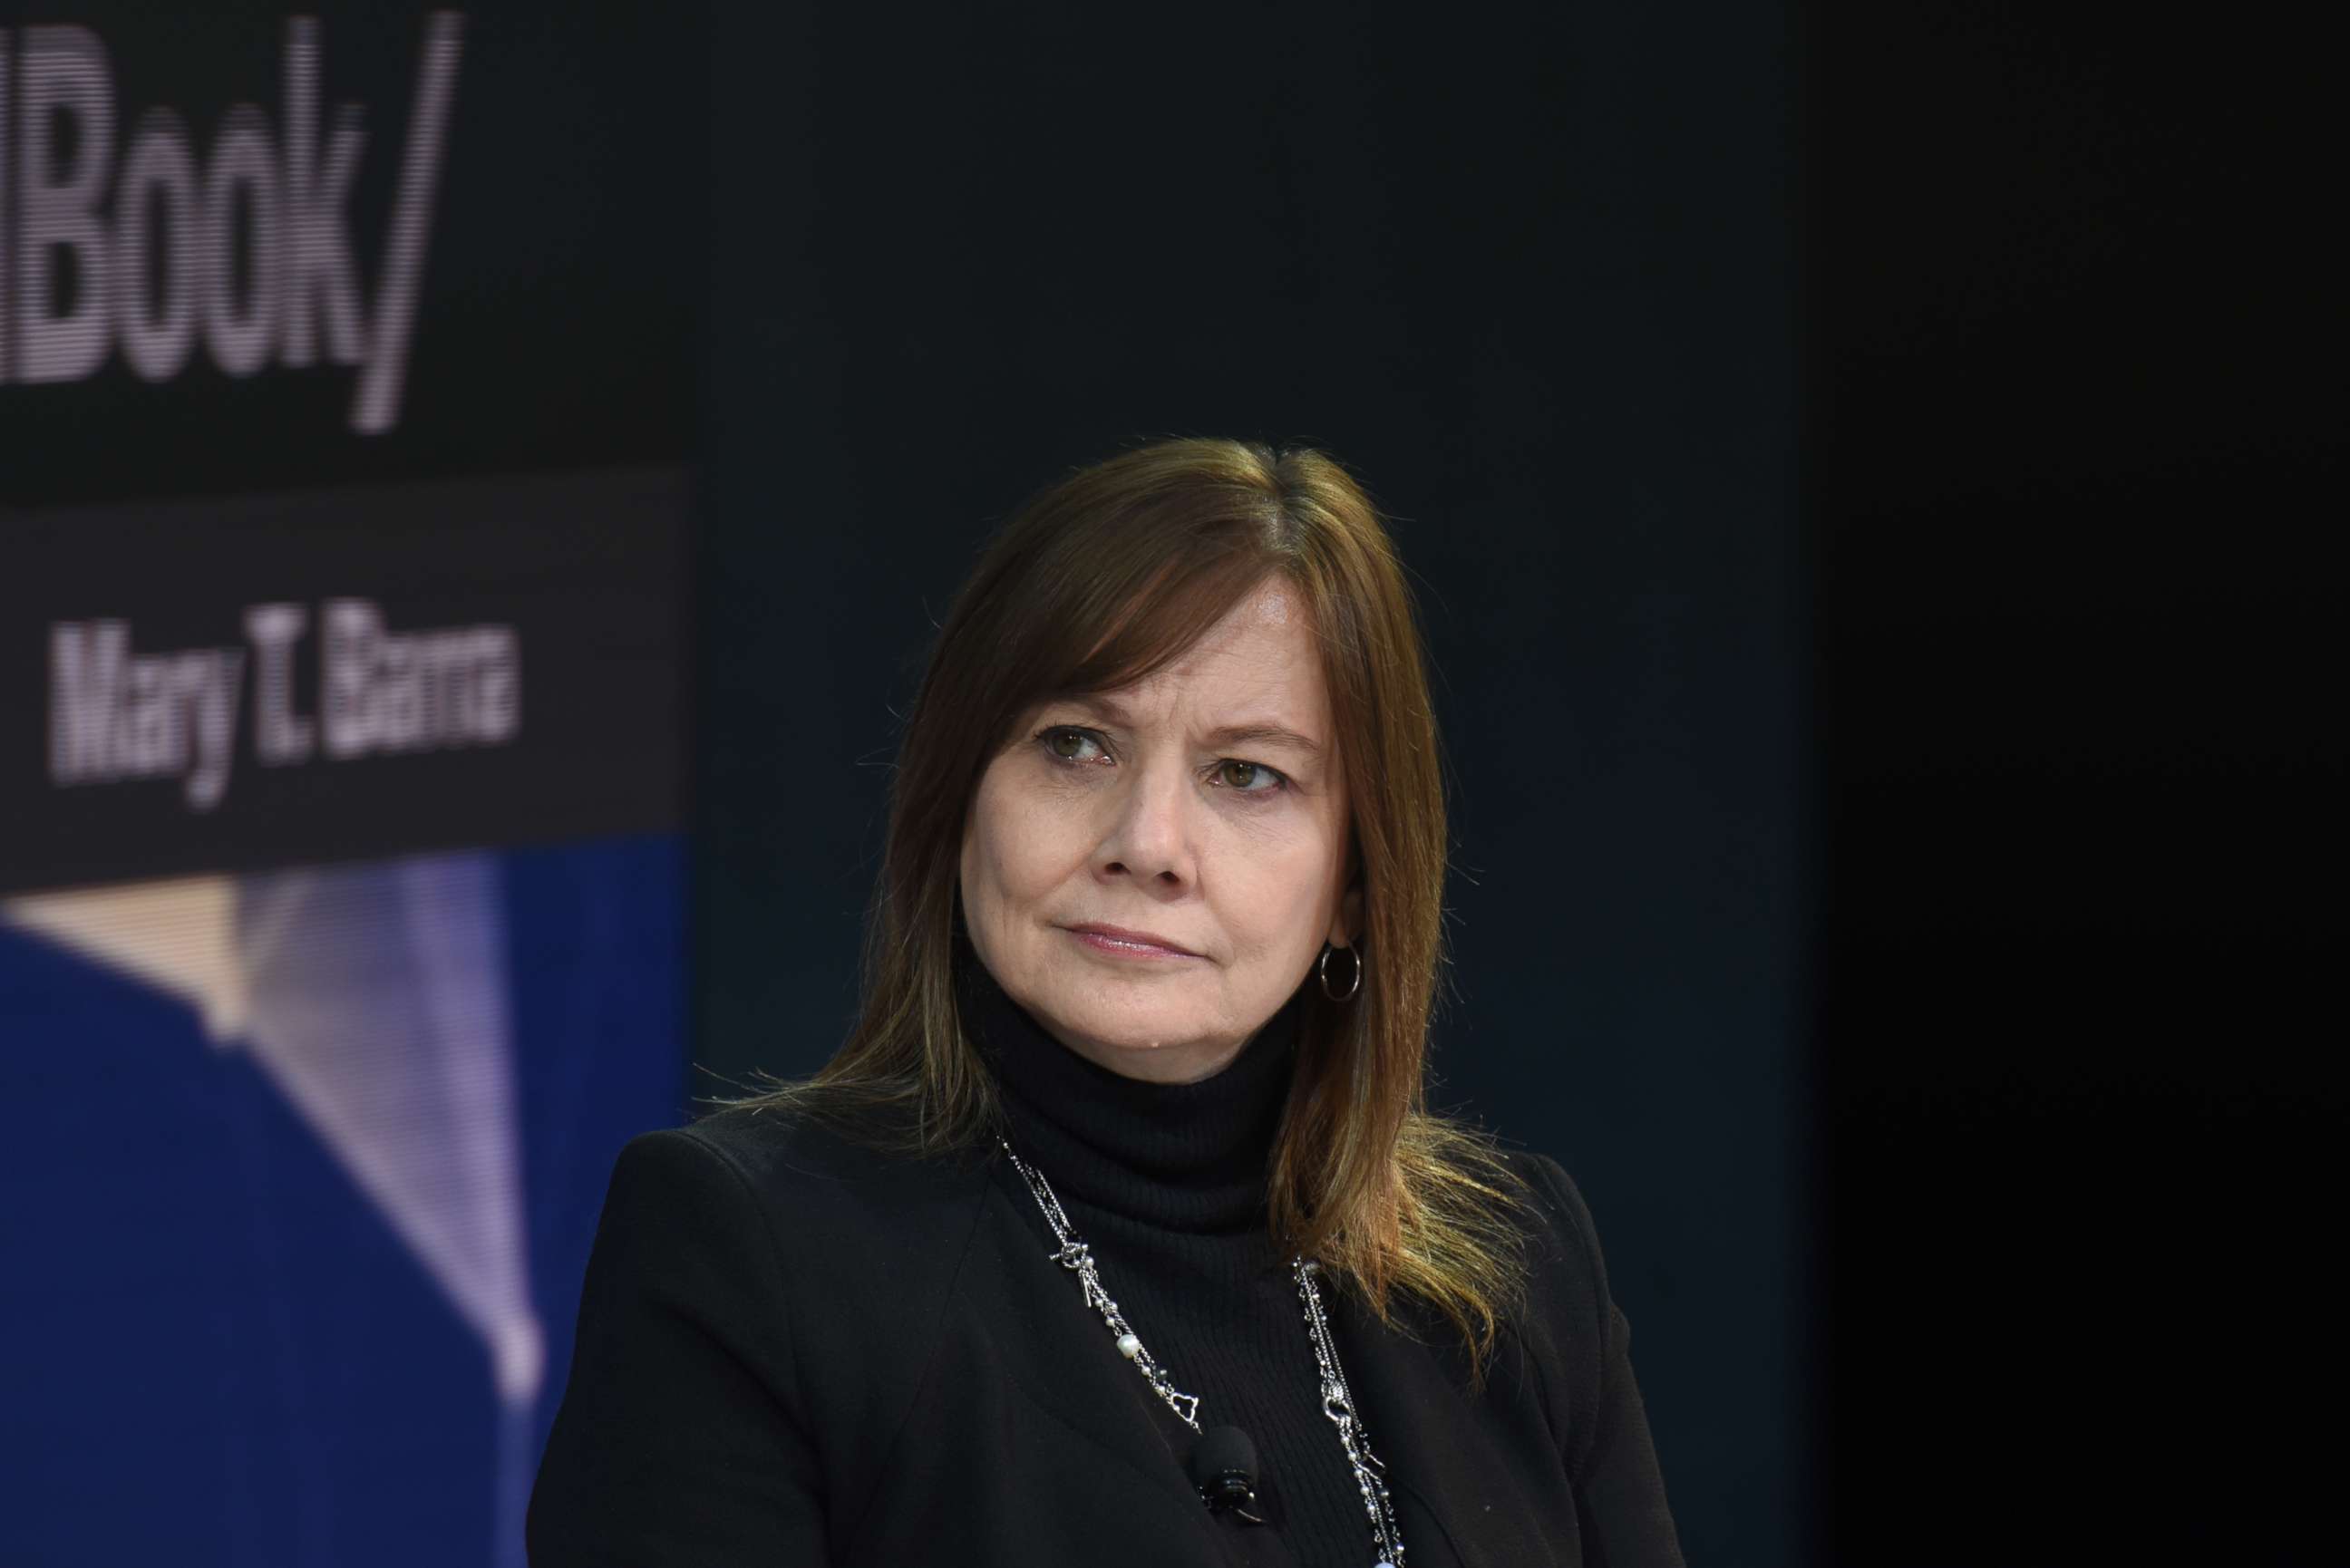 PHOTO: Mary Barra, chairman and CEO of General Motors speaks at the New York Times DealBook conference, Nov. 1, 2018, in New York.